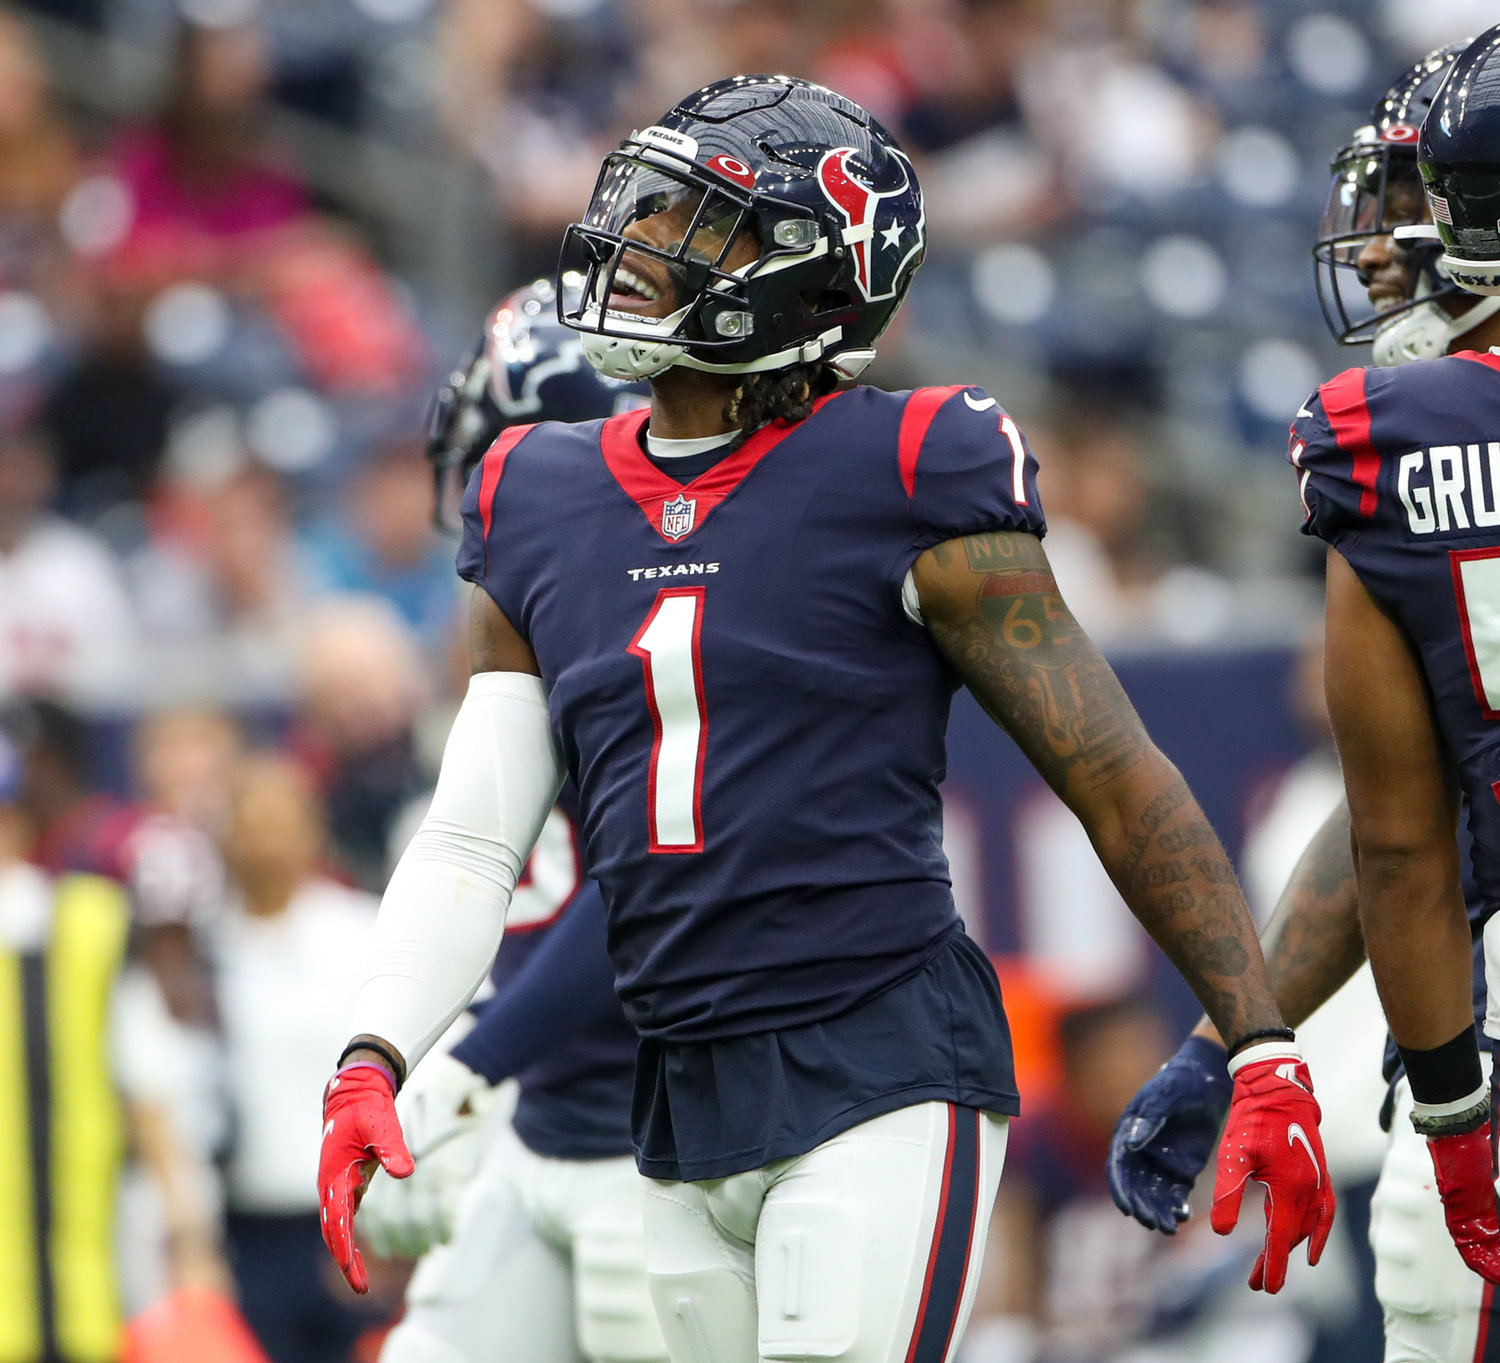 Houston Texans safety Lonnie Johnson (1) reacts after being flagged for unnecessary roughness on a tackle during an NFL game between Houston and New England on October 10, 2021 in Houston, Texas. The Patriots won 25-22.